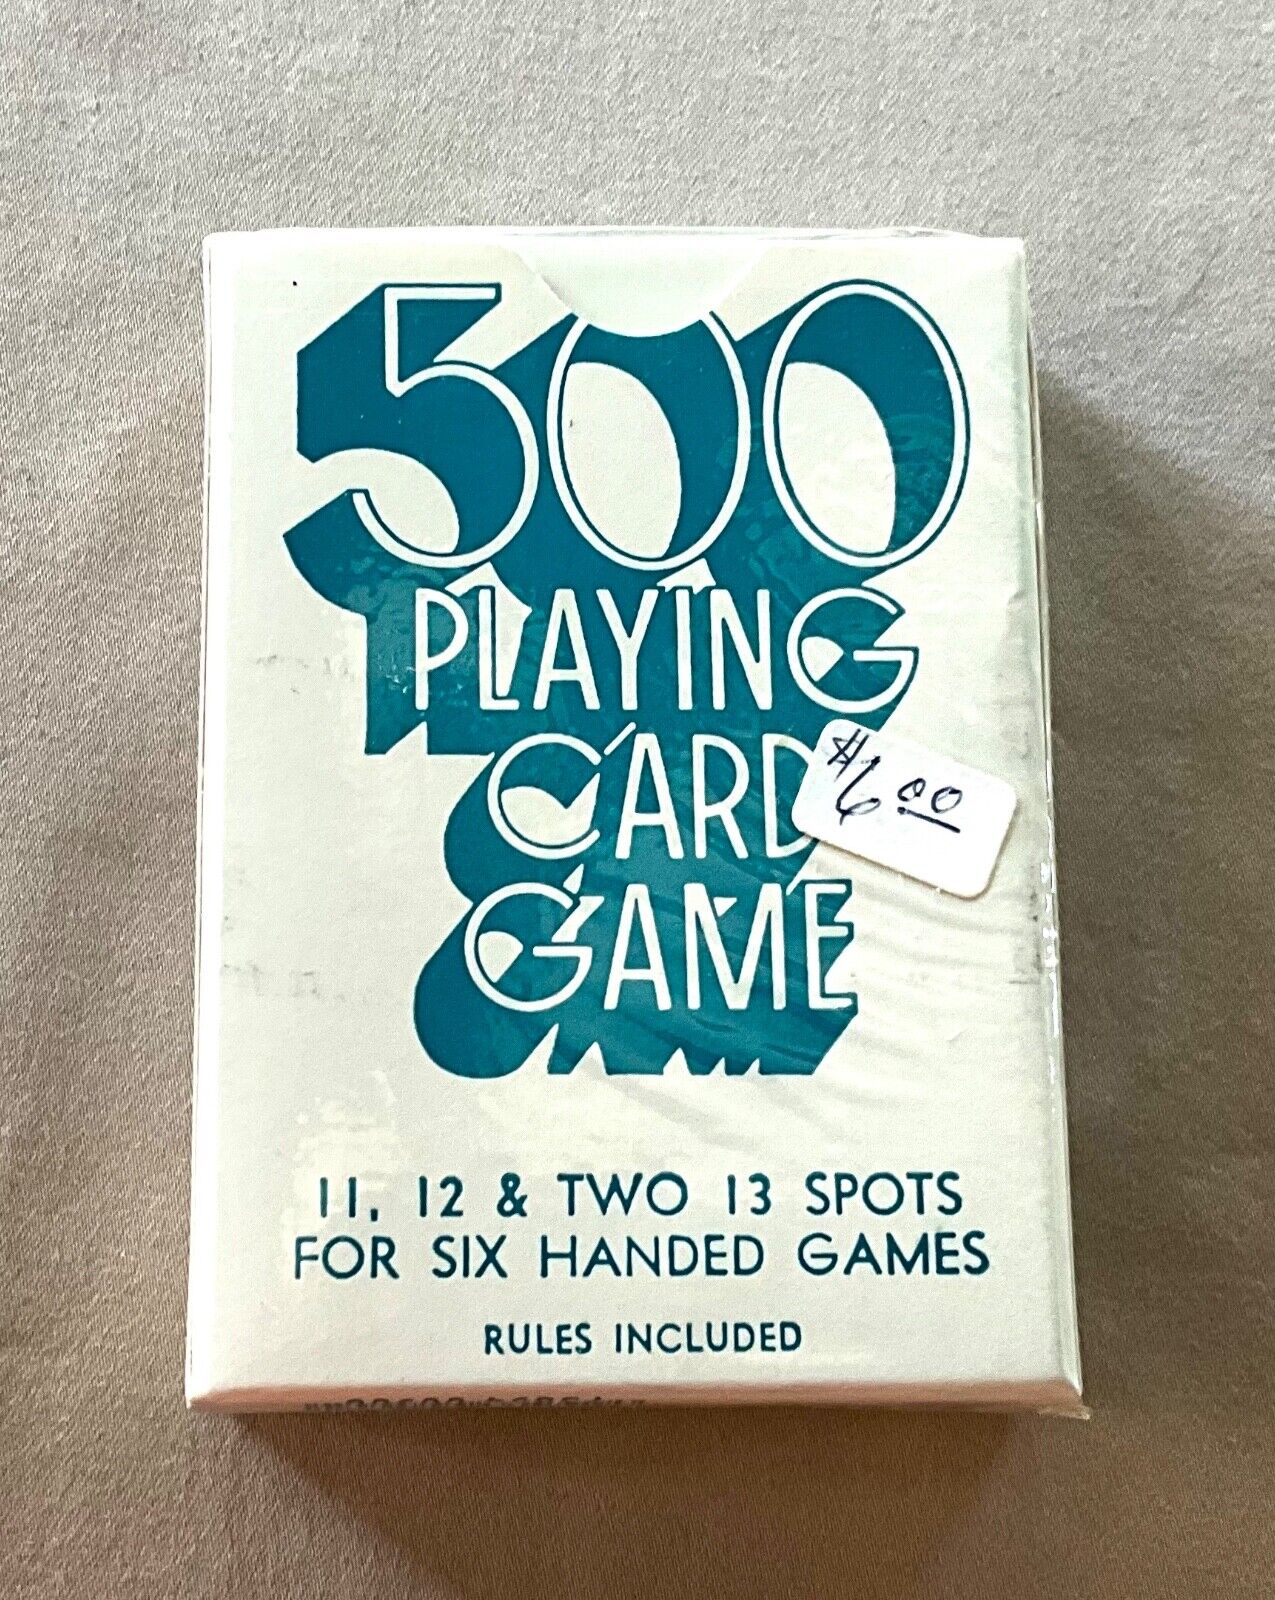 Vintage USPC ~ “500 Playing Card Game” ~ 11, 12 & Two 13 Spots ~ Factory Sealed